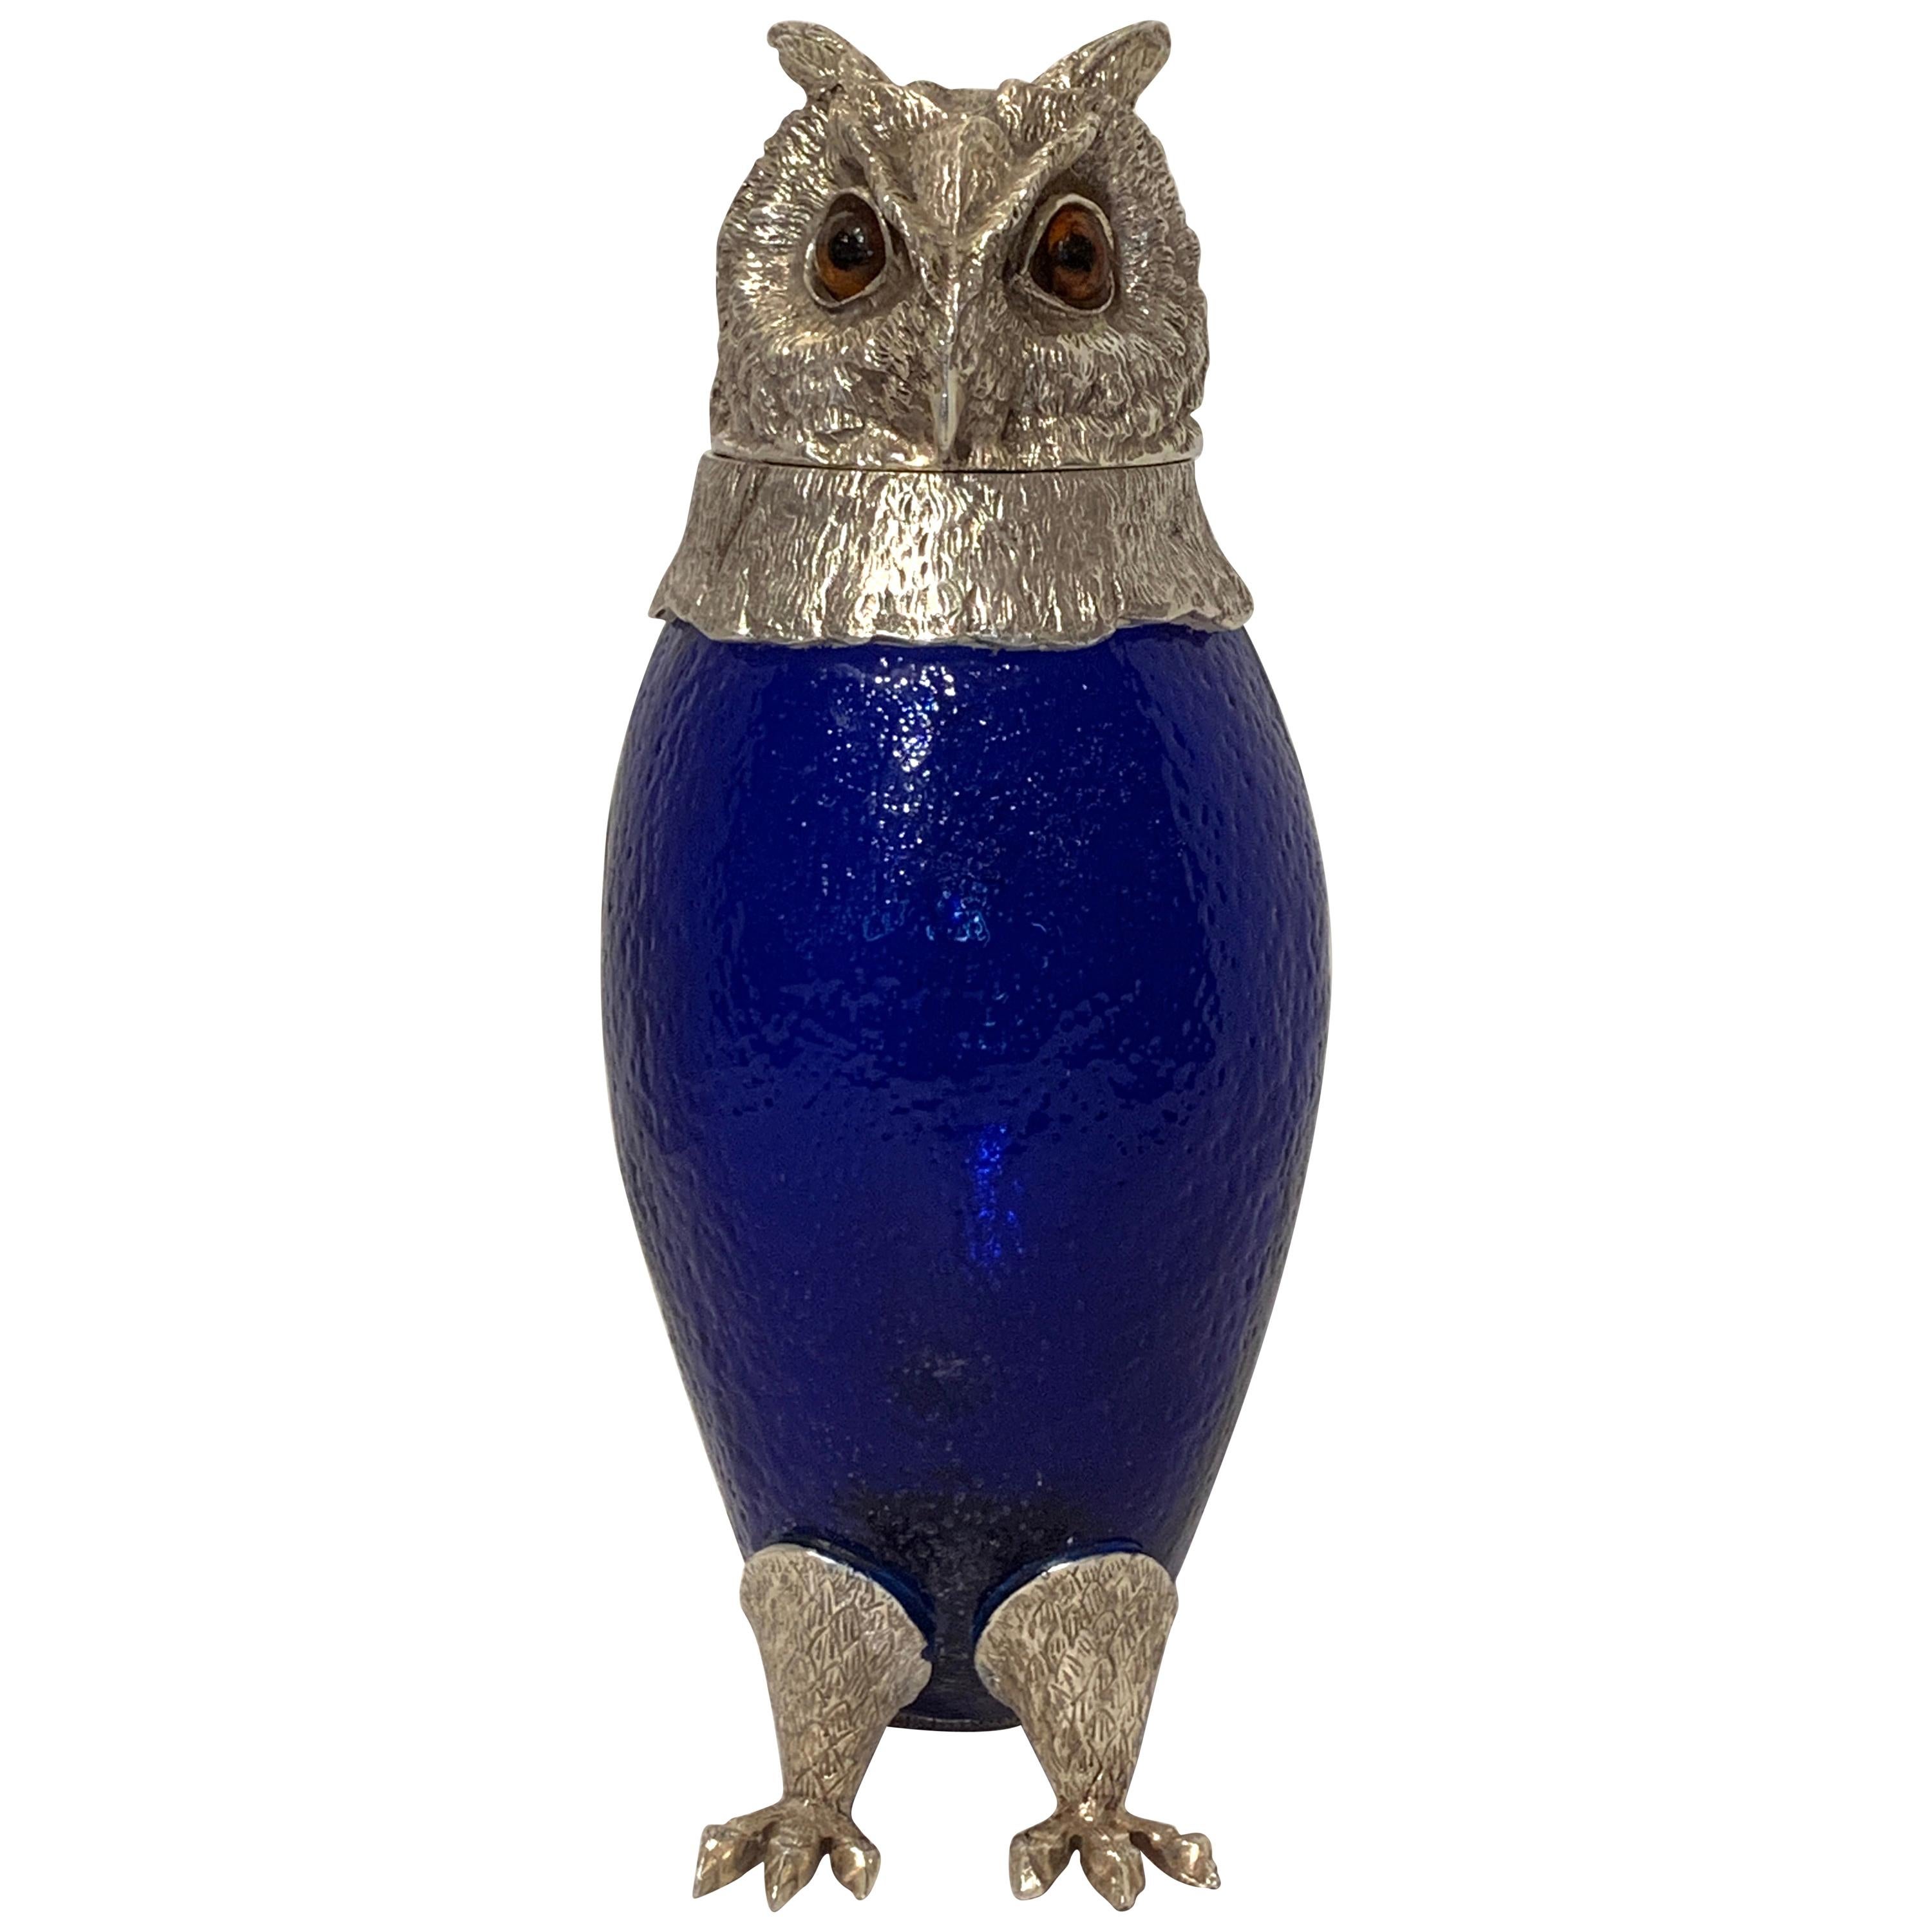 English Silverplated Owl Motif Decanter